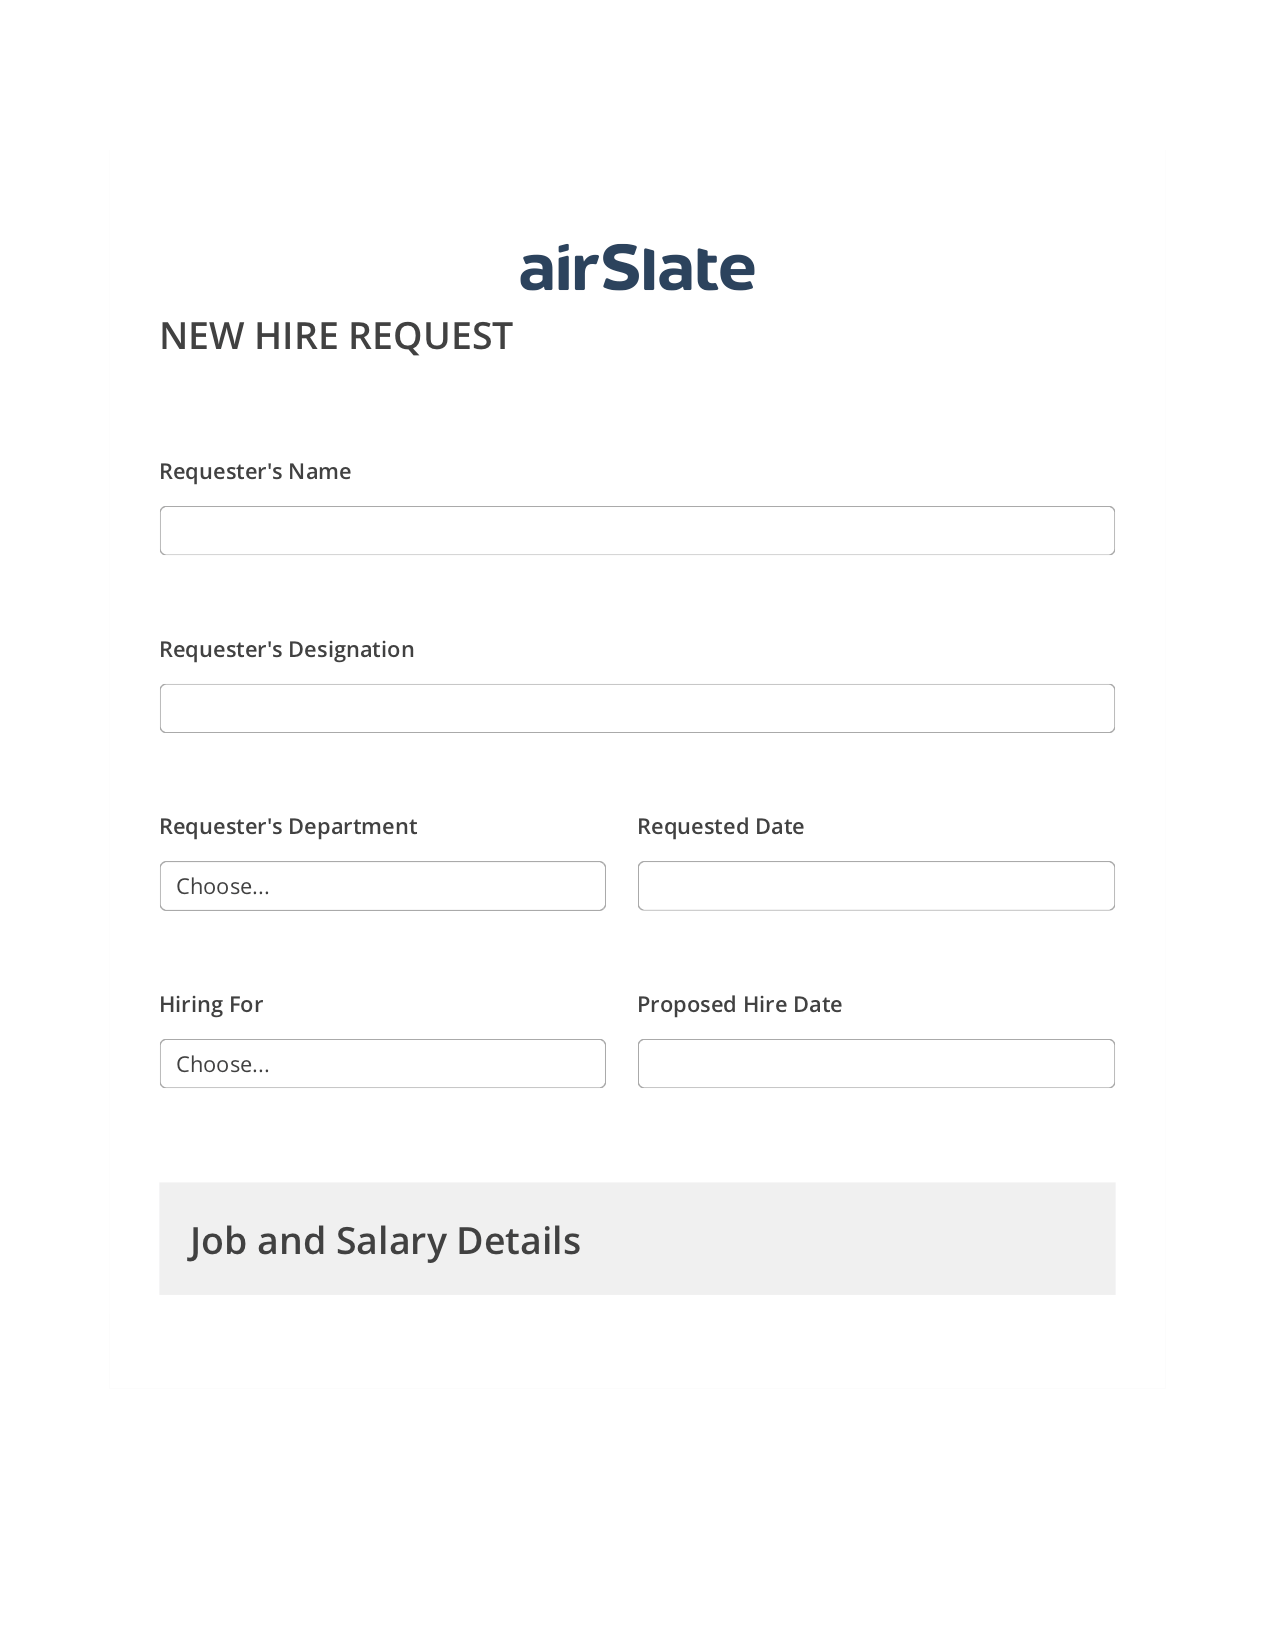 Hiring Request Workflow Pre-fill Dropdowns from Smartsheet Bot, Send a Slate to MS Dynamics 365 Contact Bot, Archive to OneDrive Bot